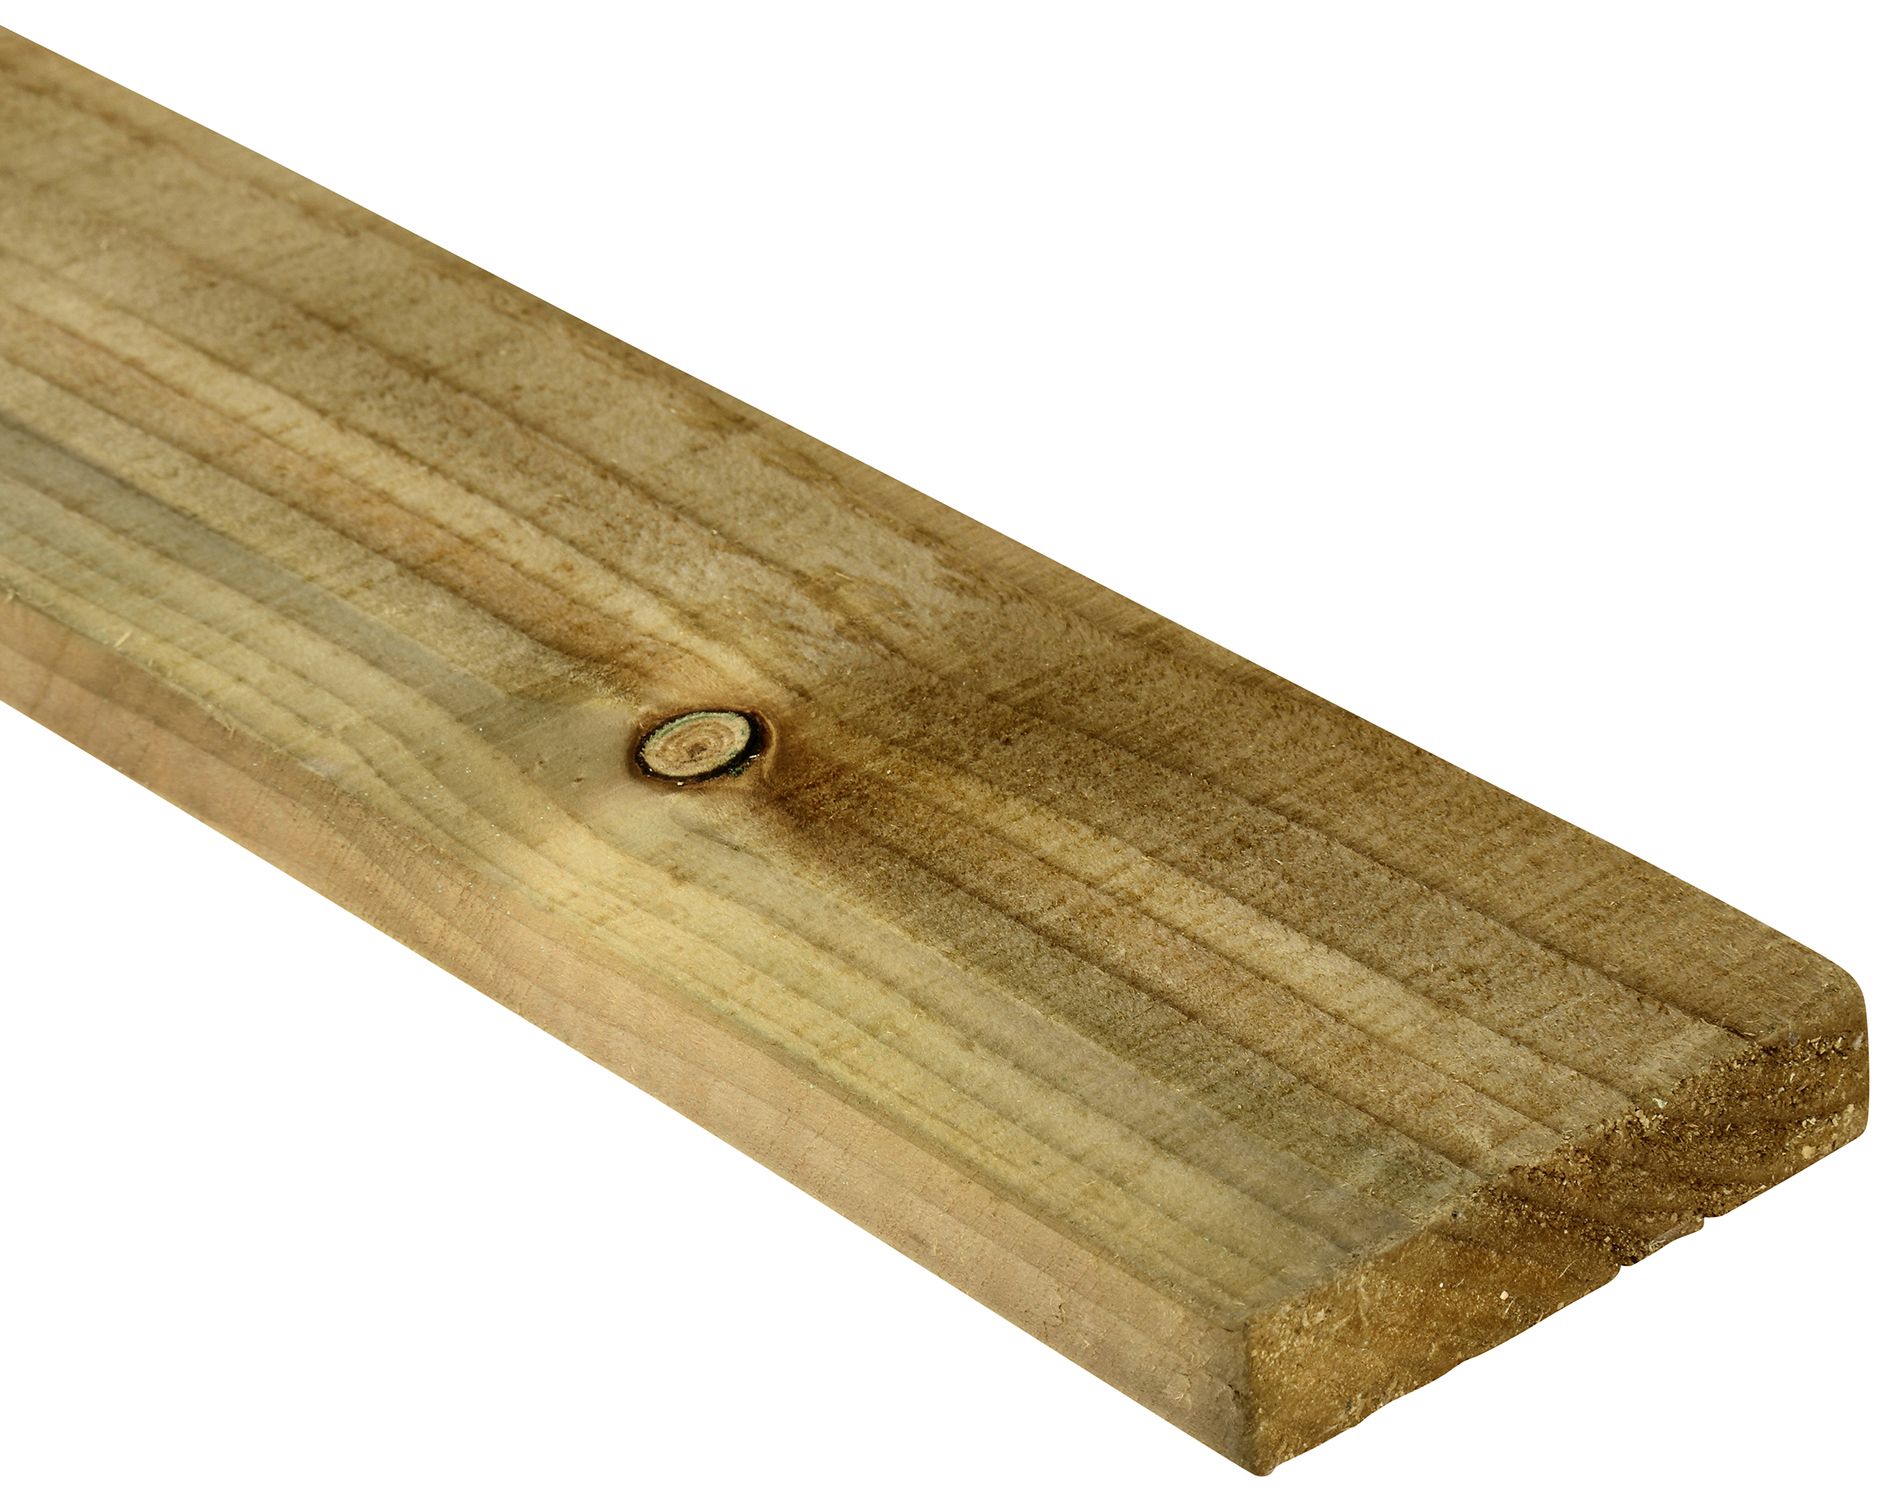 Image of Wickes Treated Sawn Timber - 22 x 100 x 2400mm